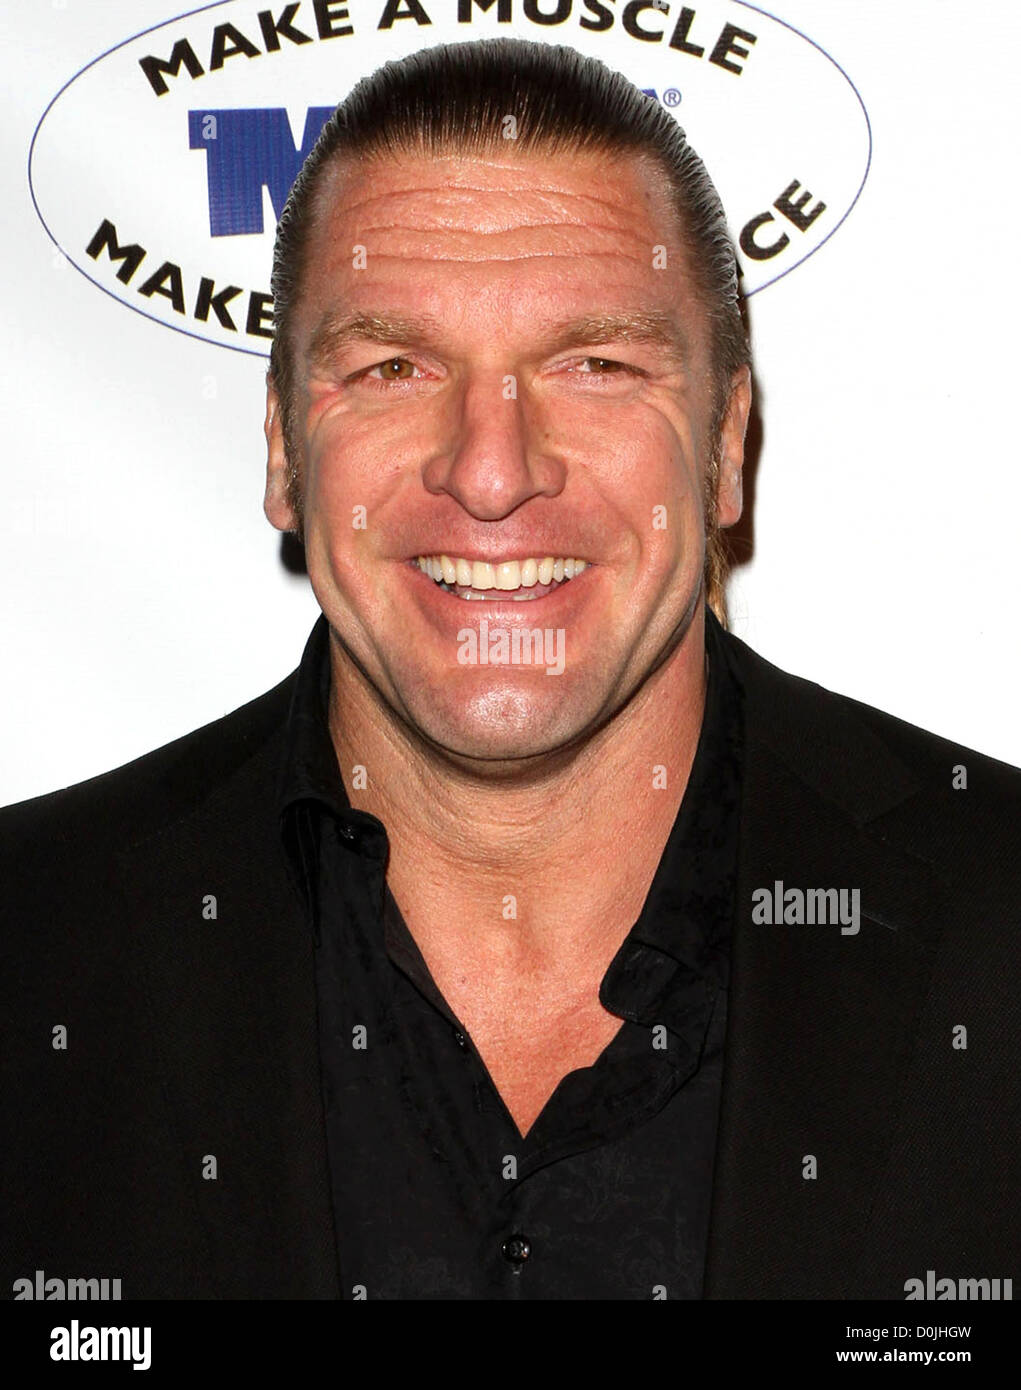 Wwe superstar triple h hi-res stock photography and images - Alamy